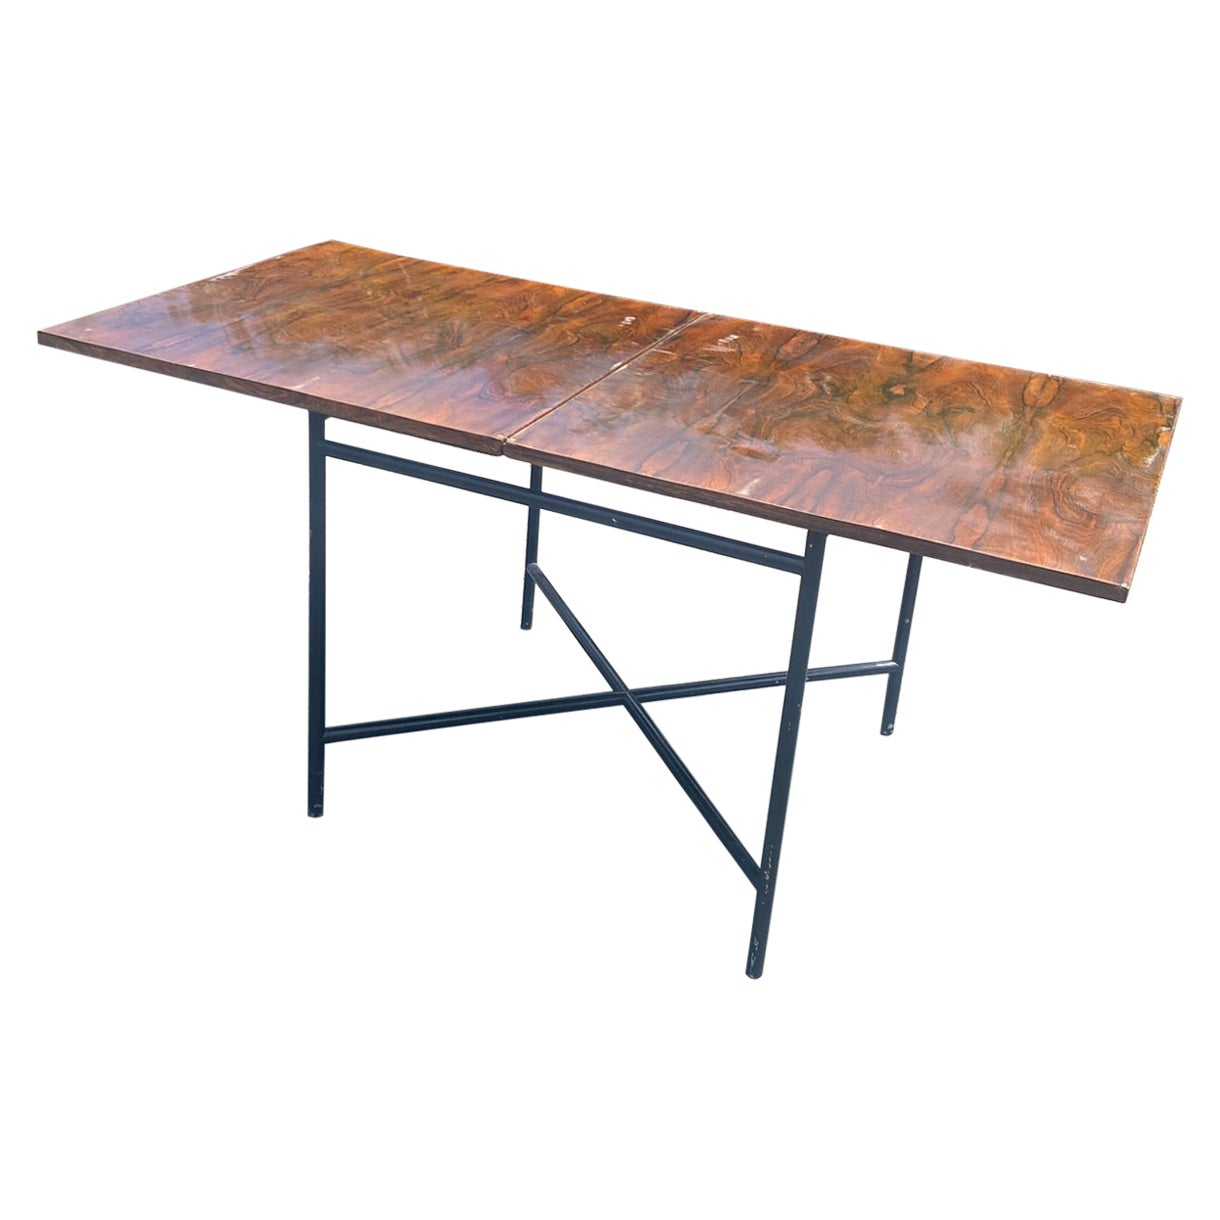 Game table and art deco modernist system table circa 1930 repainted base For Sale